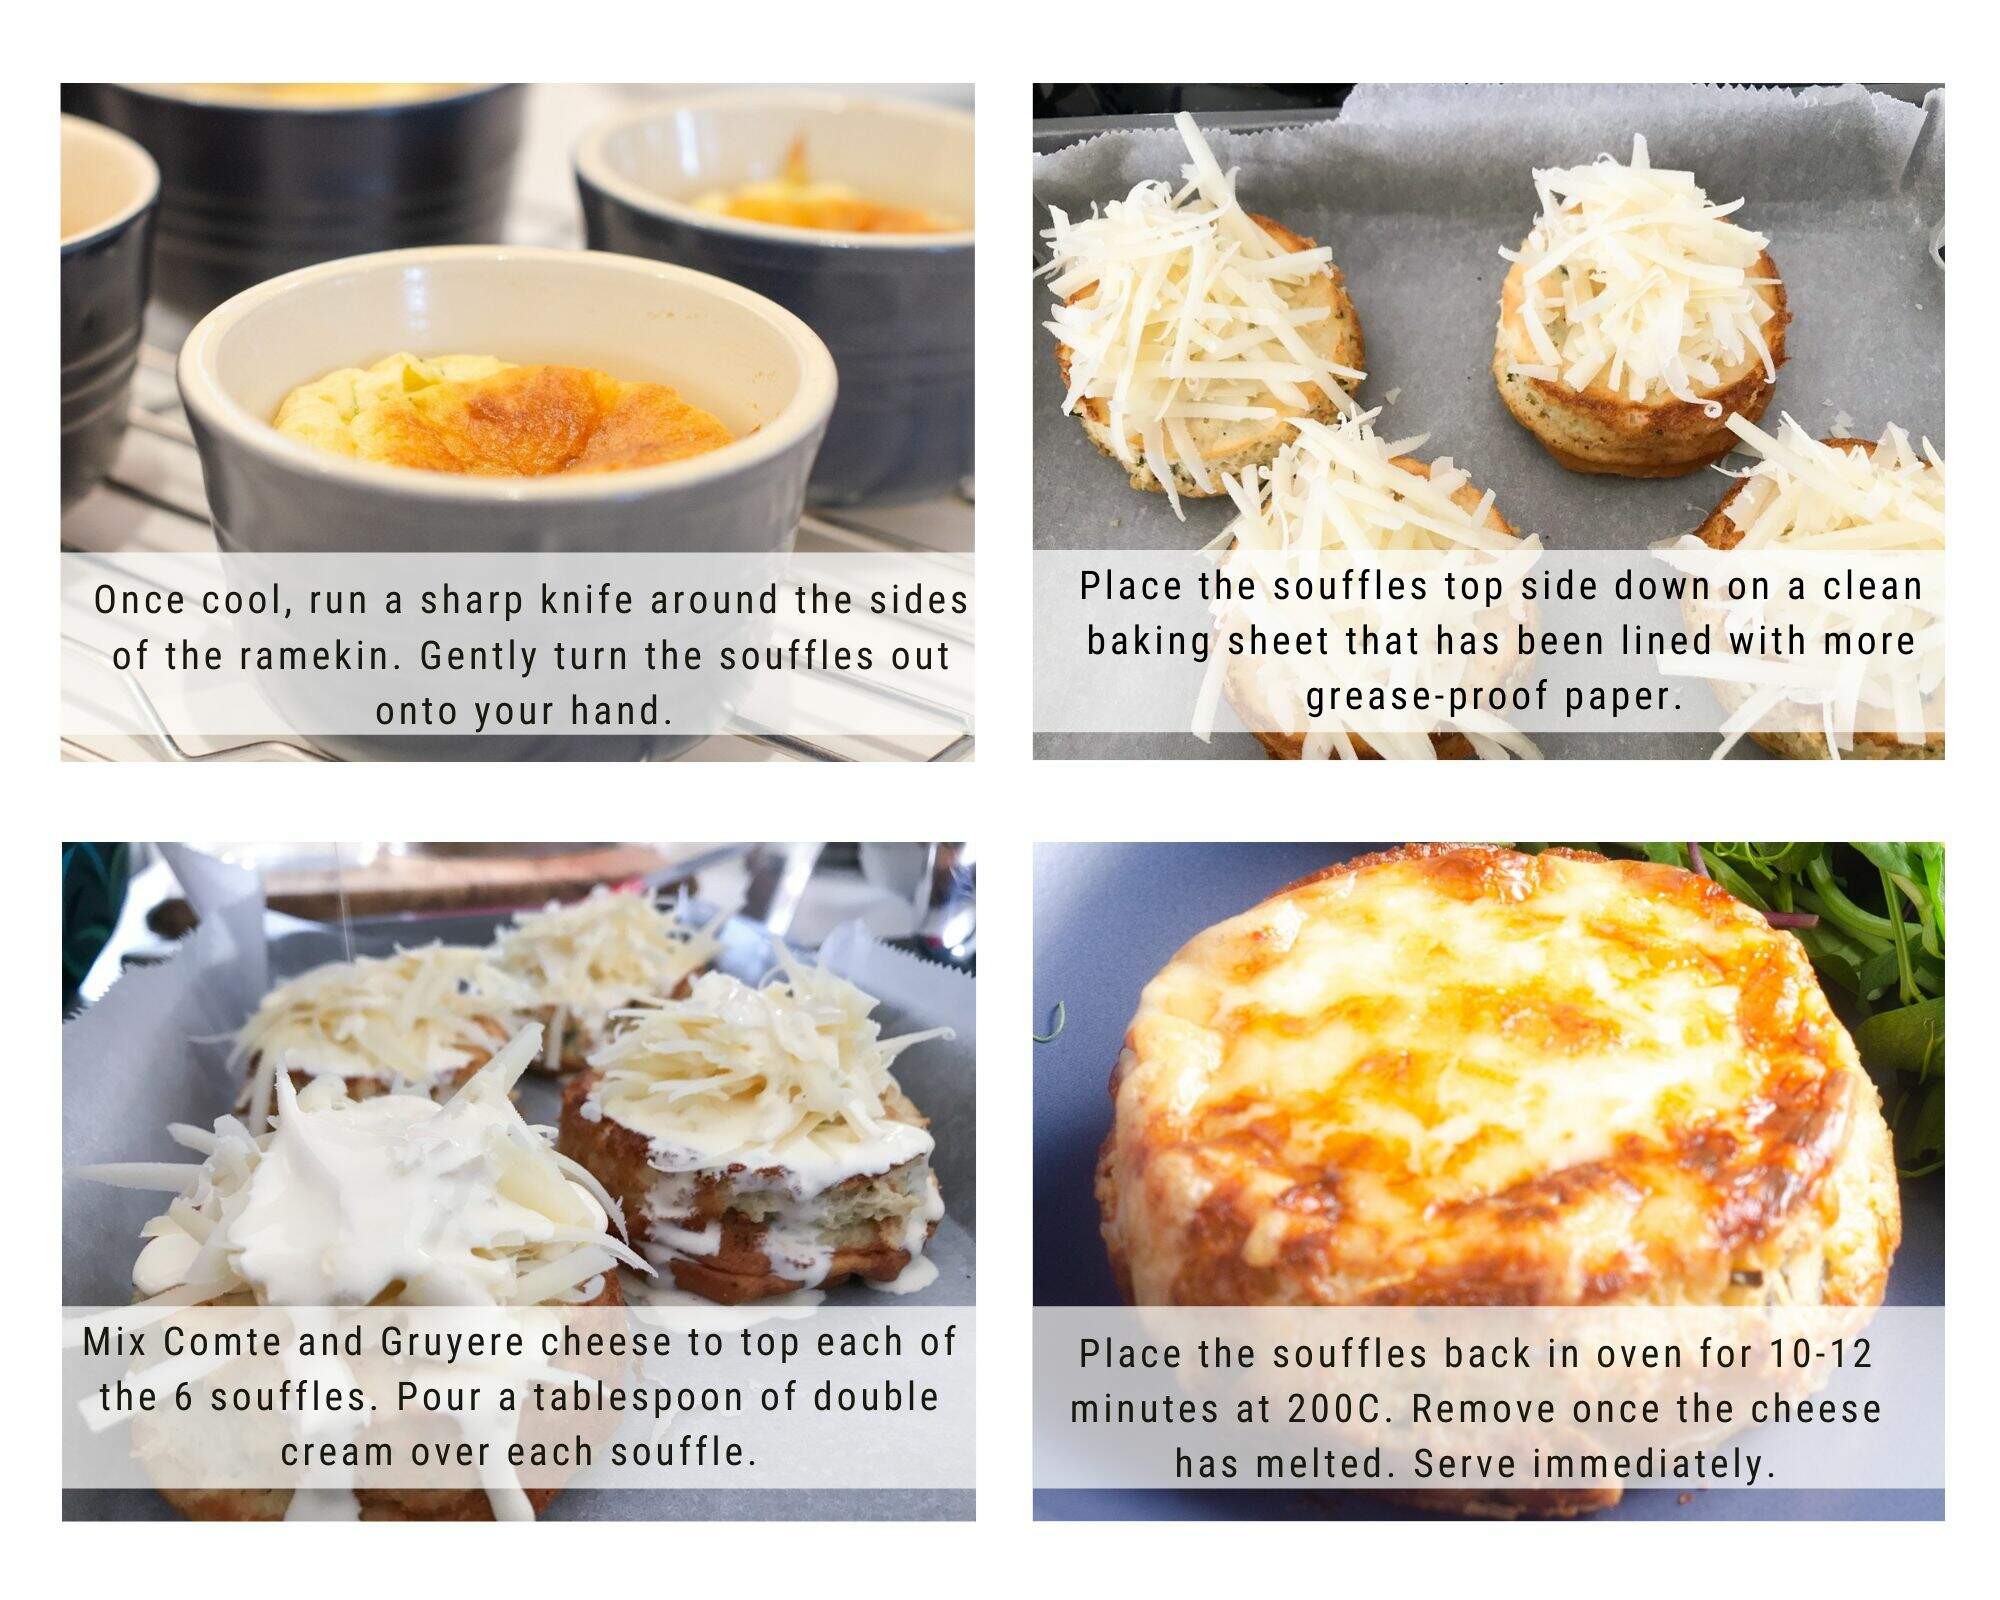 How to make twice baked cheese souffle step by step process by Lost in Food.